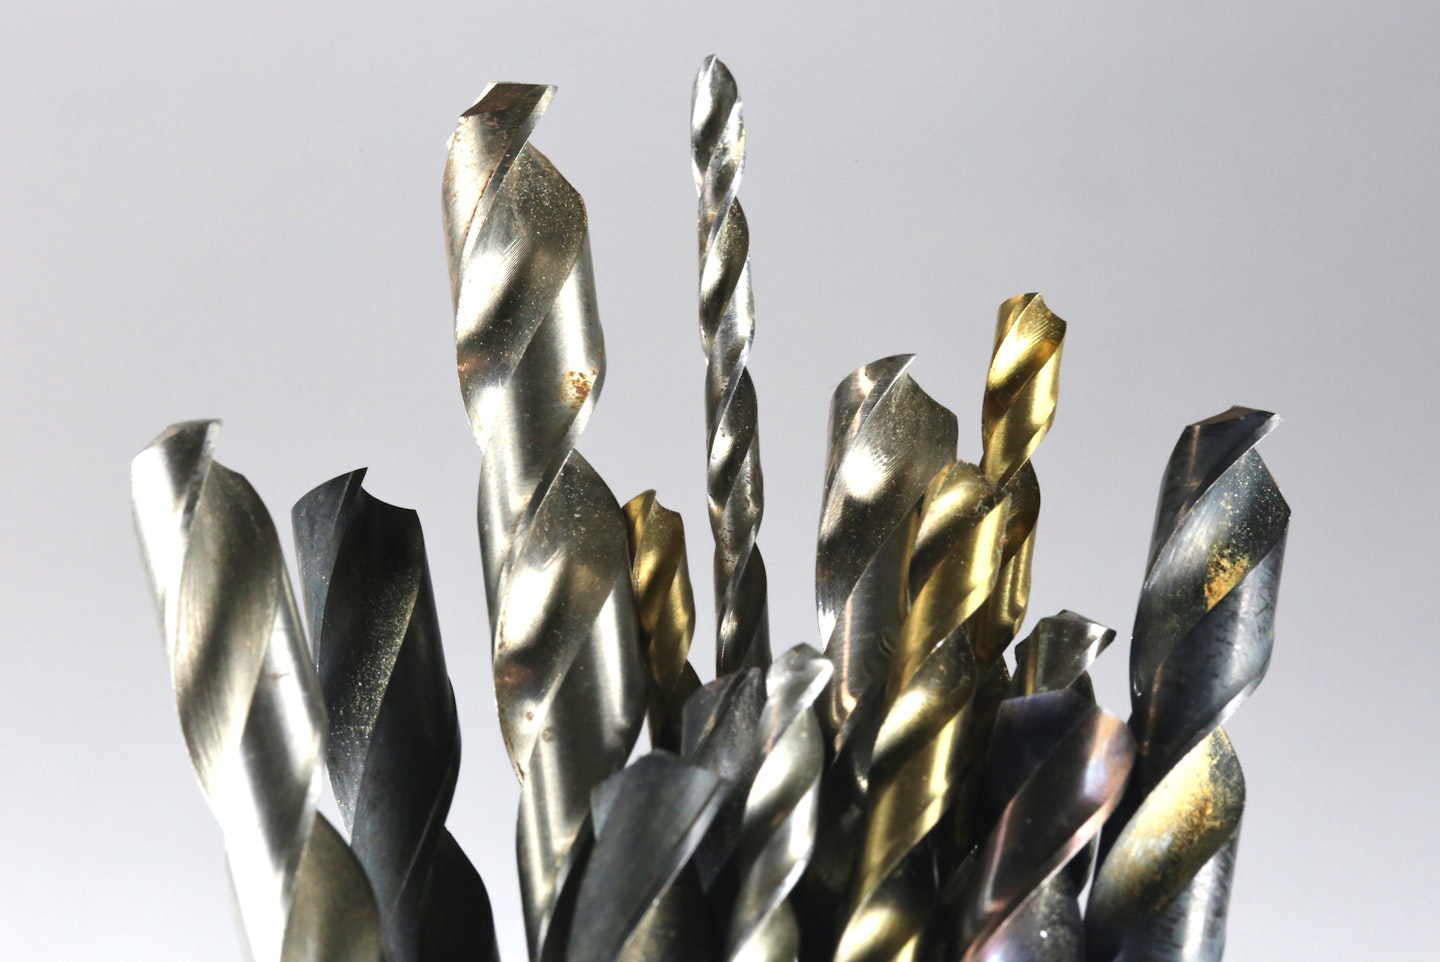 A Guide To Drill Bits For DIYers